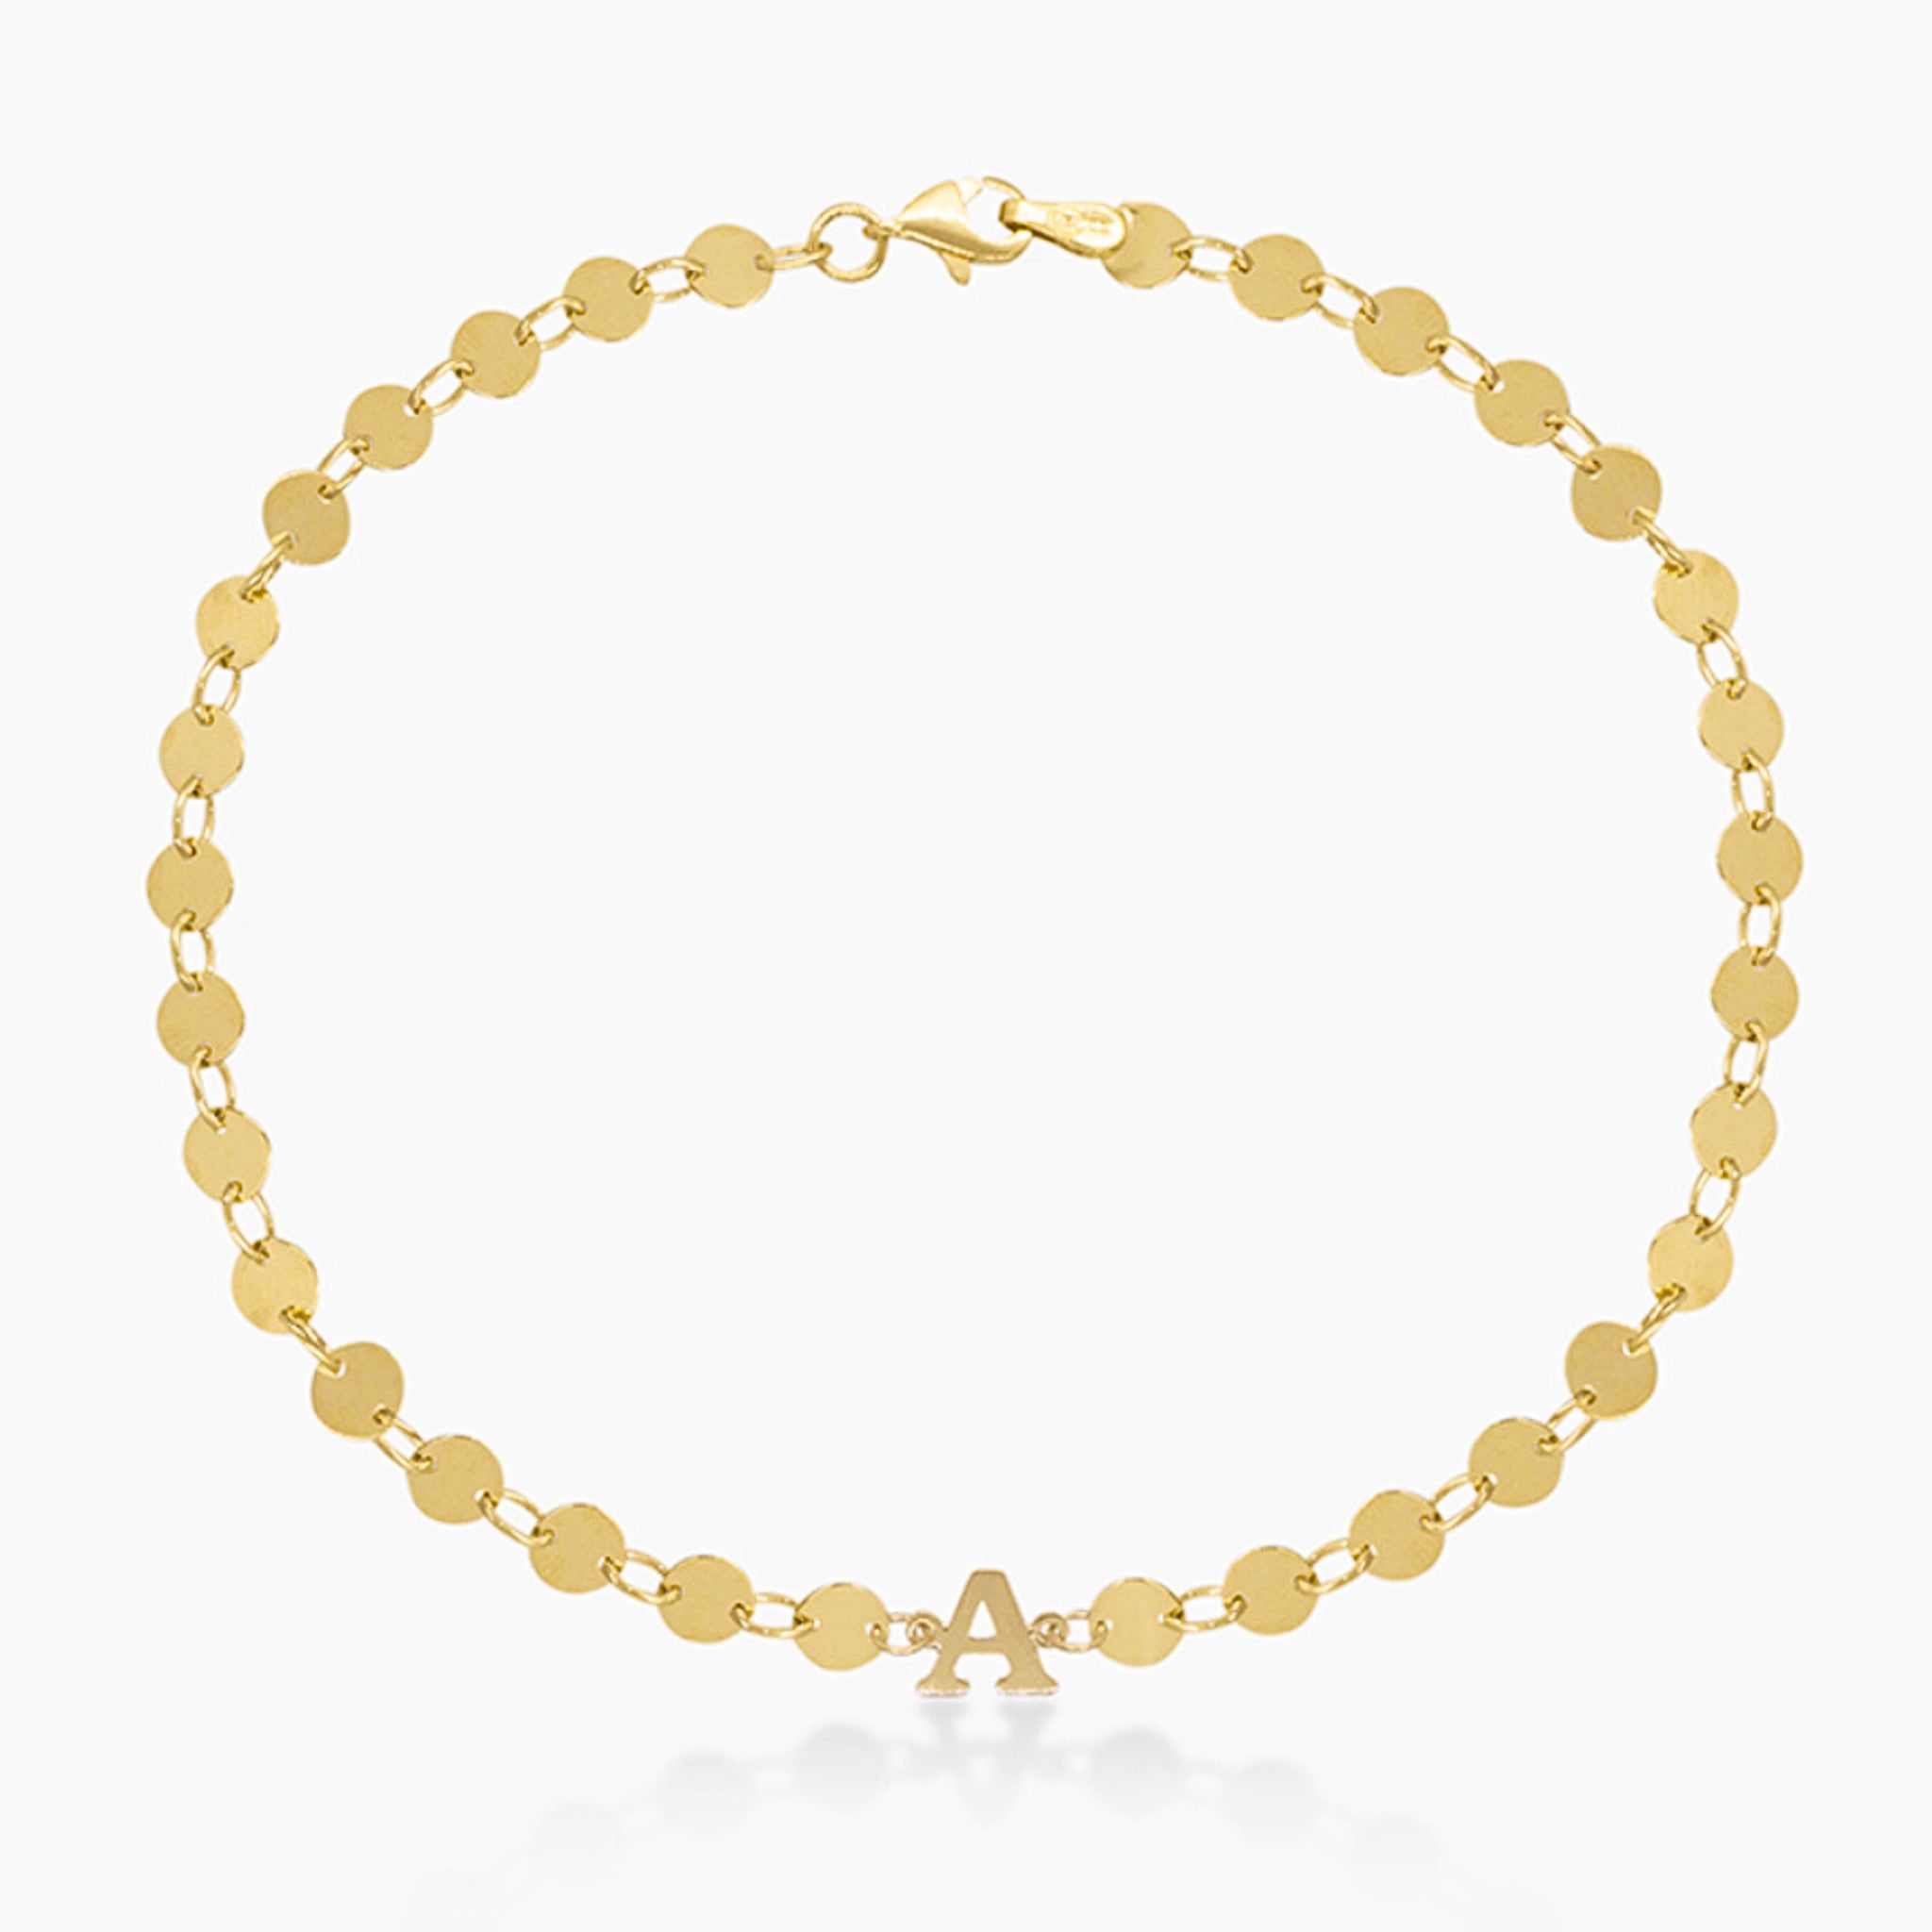 14K YELLOW GOLD INITIAL DISCS ANKLET